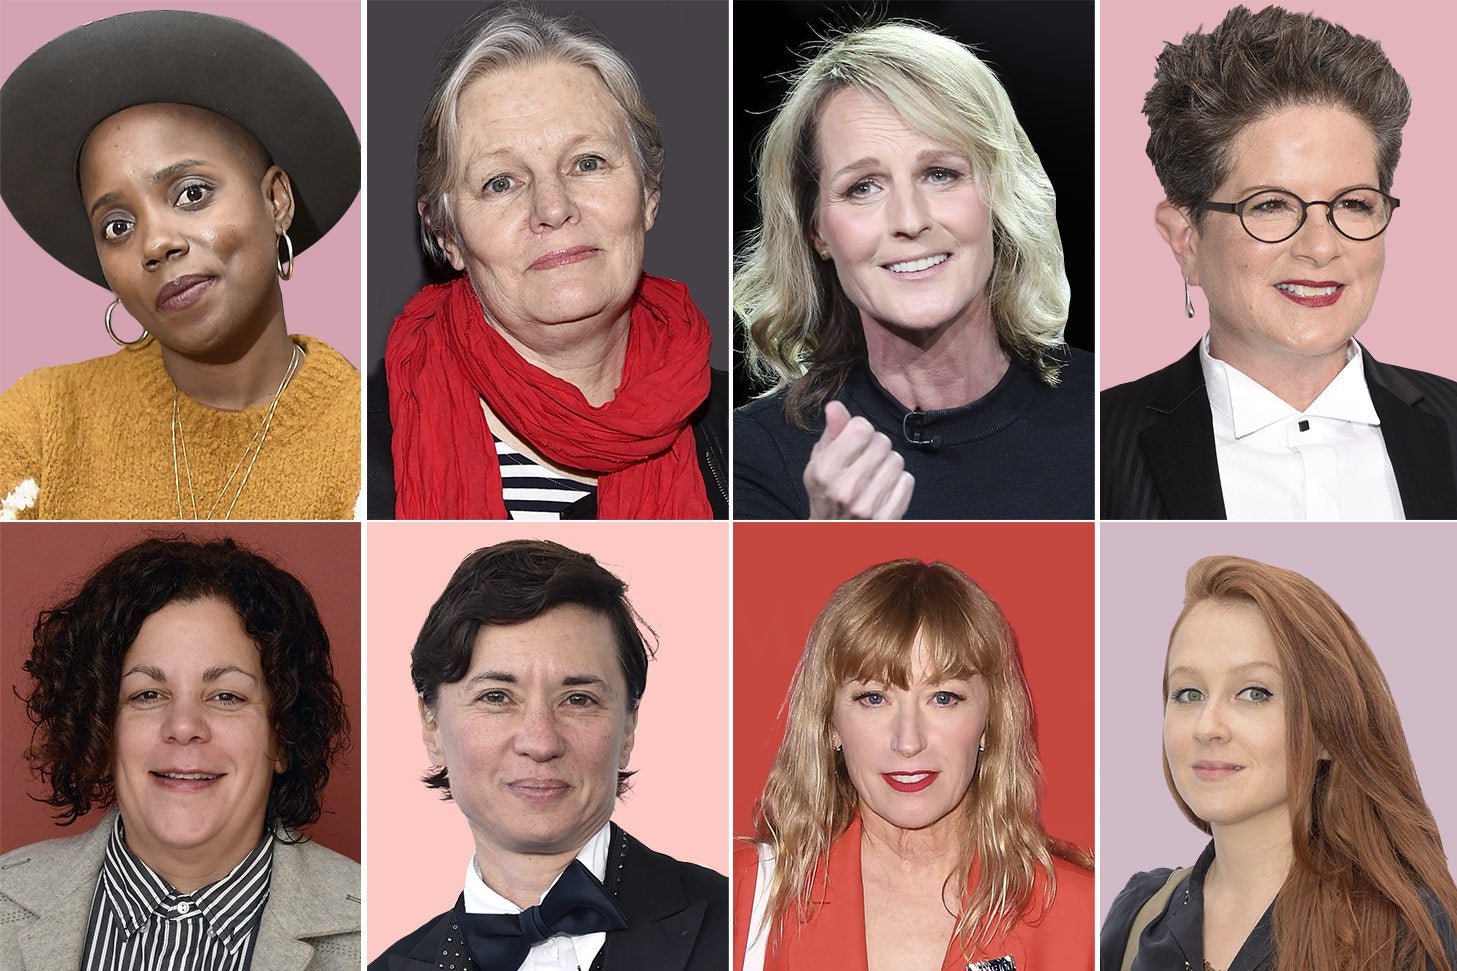 Some of the female and gender-fluid filmmakers whose movies Vachon has produced. Row 1: Janicza Bravo, Mary Harron, Helen Hunt, and Phyllis Nagy. Row 2: Rose Troche, Kimberly Peirce, Cindy Sherman, and Elizabeth Wood.